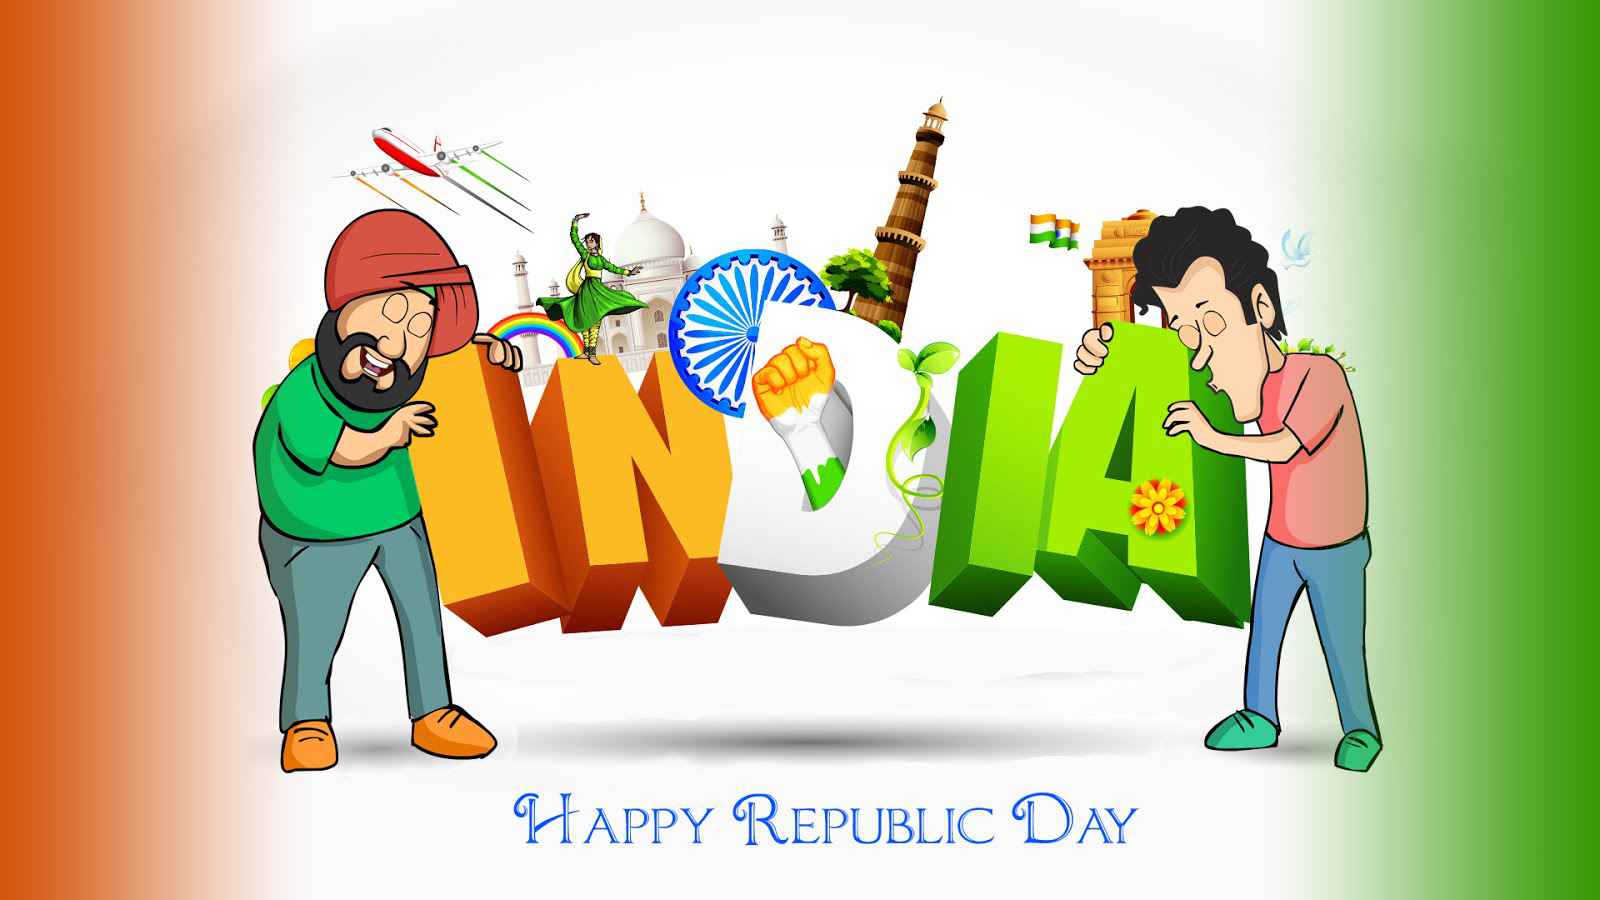 Happy Republic Day 2021 HD Image with Quotes Free Download